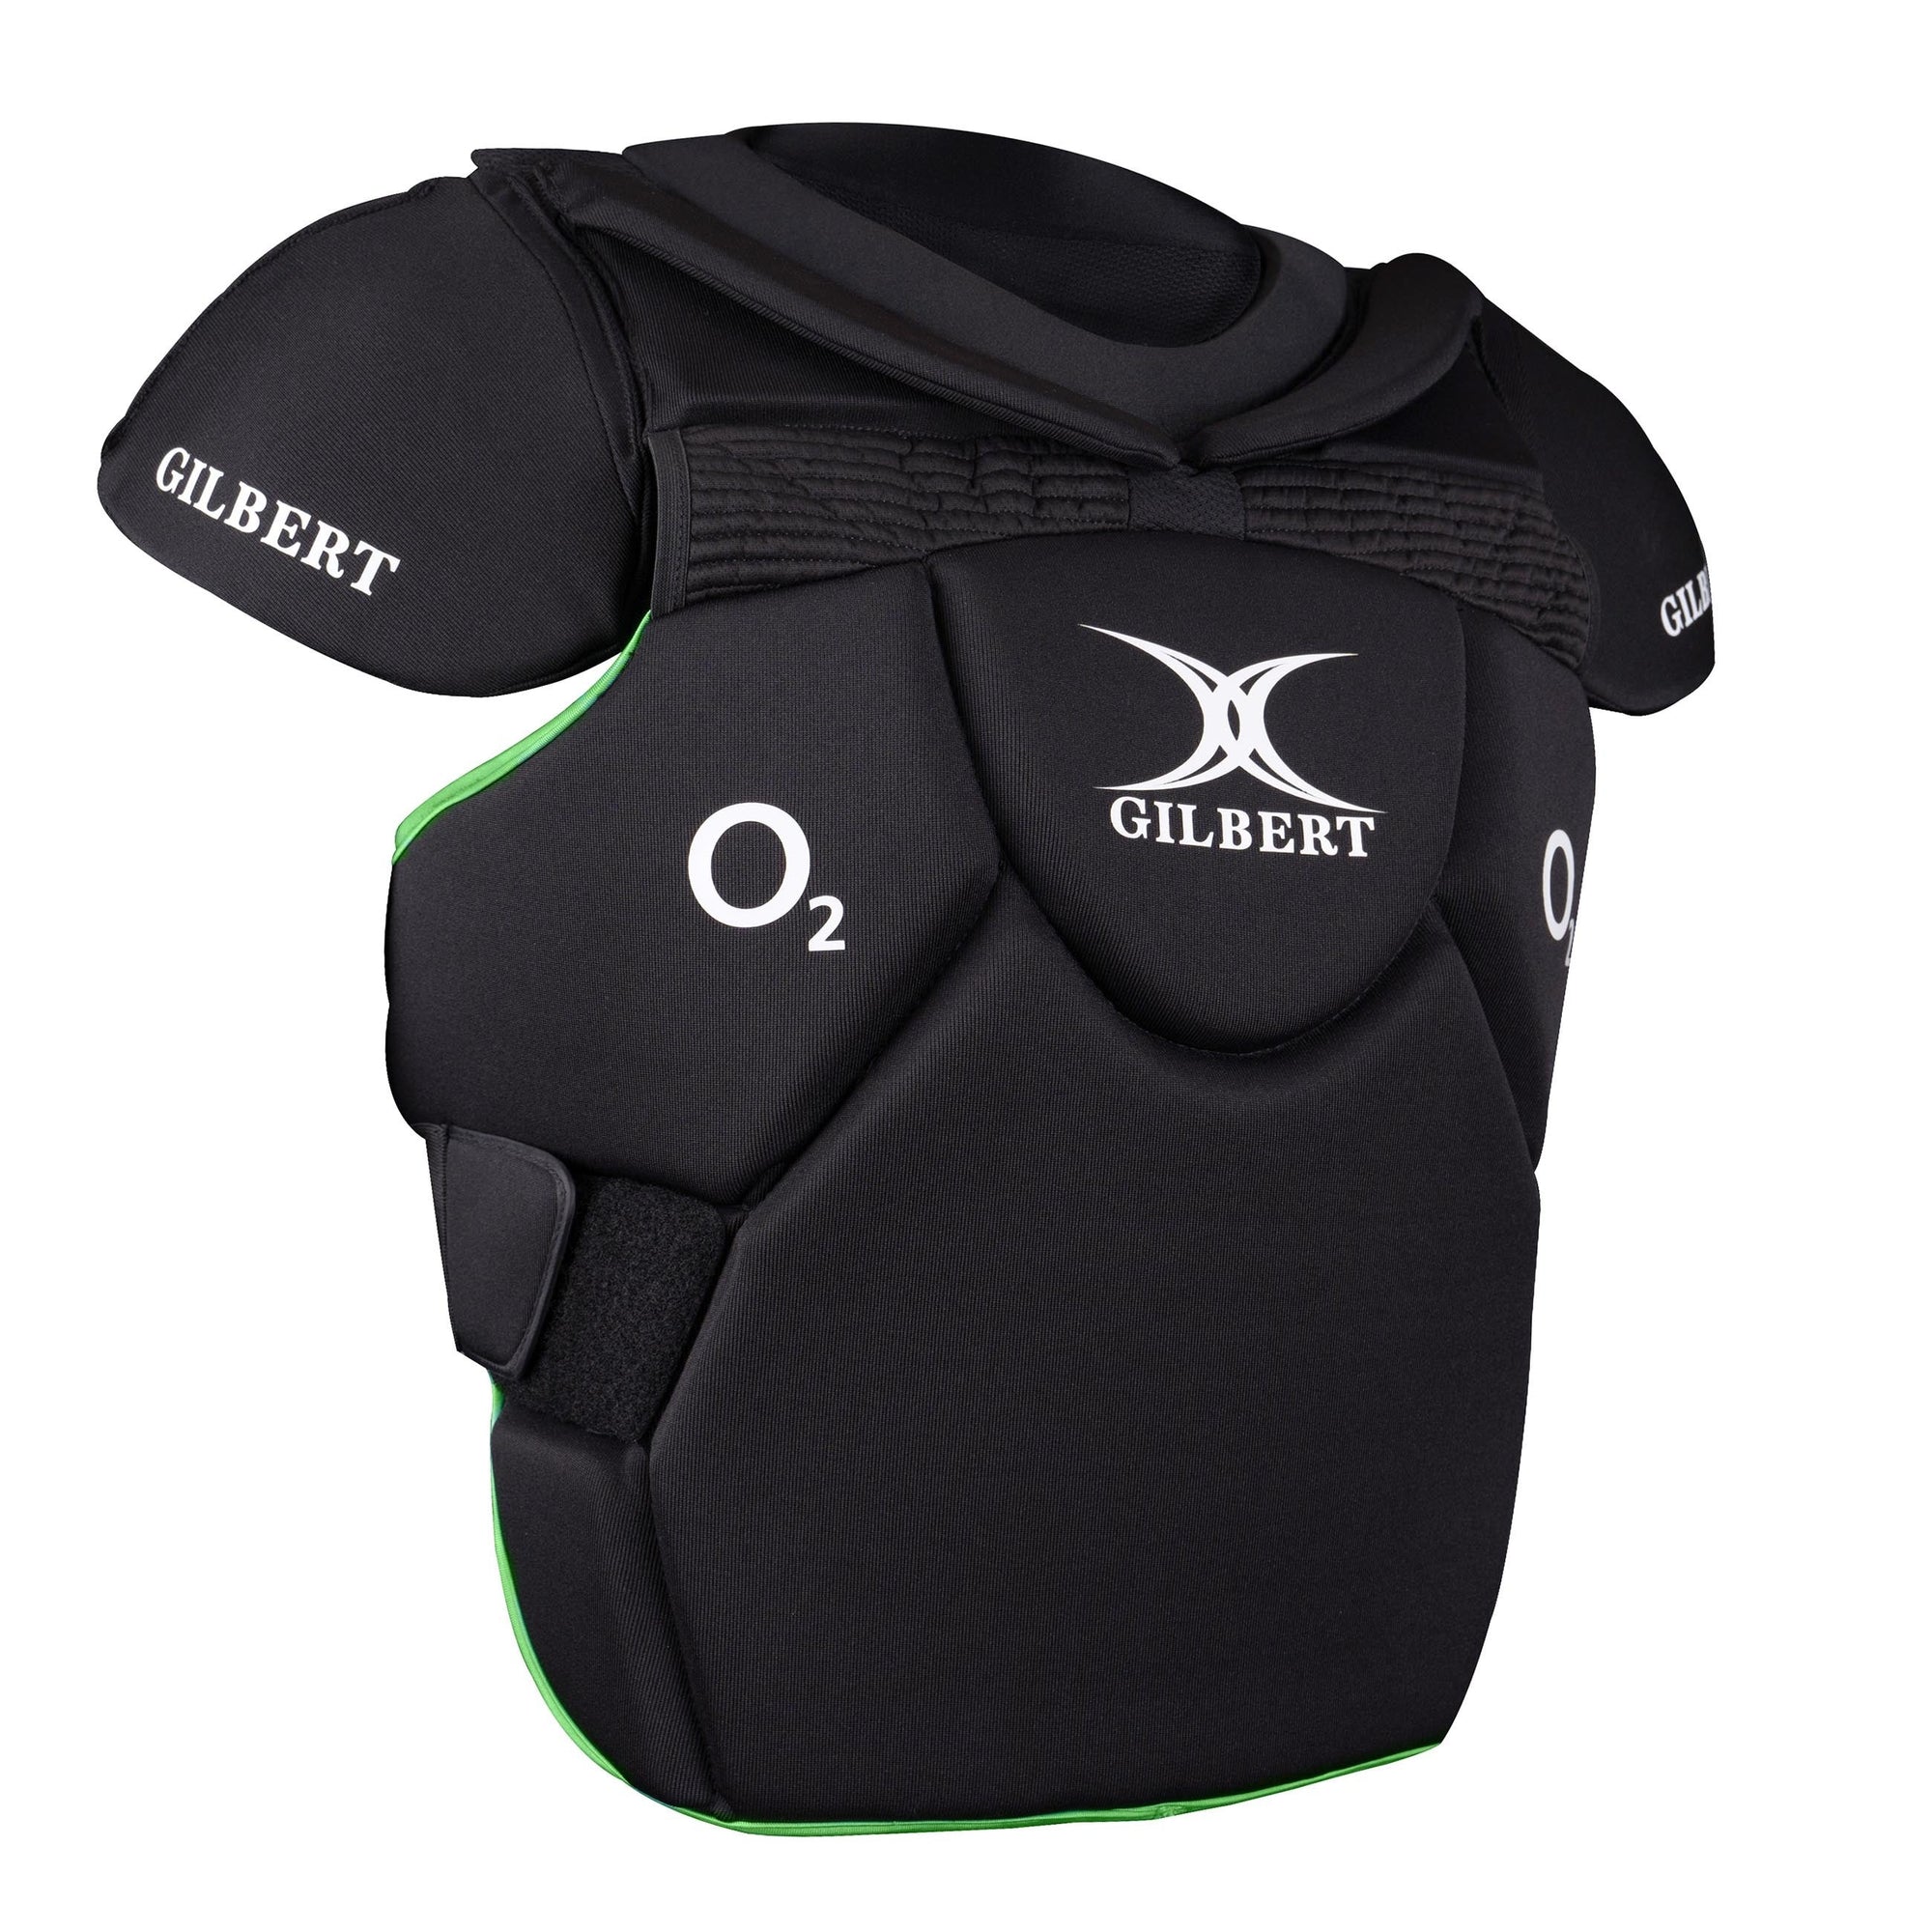 chest protector chest guard - Buy chest protector chest guard at Best Price  in Malaysia